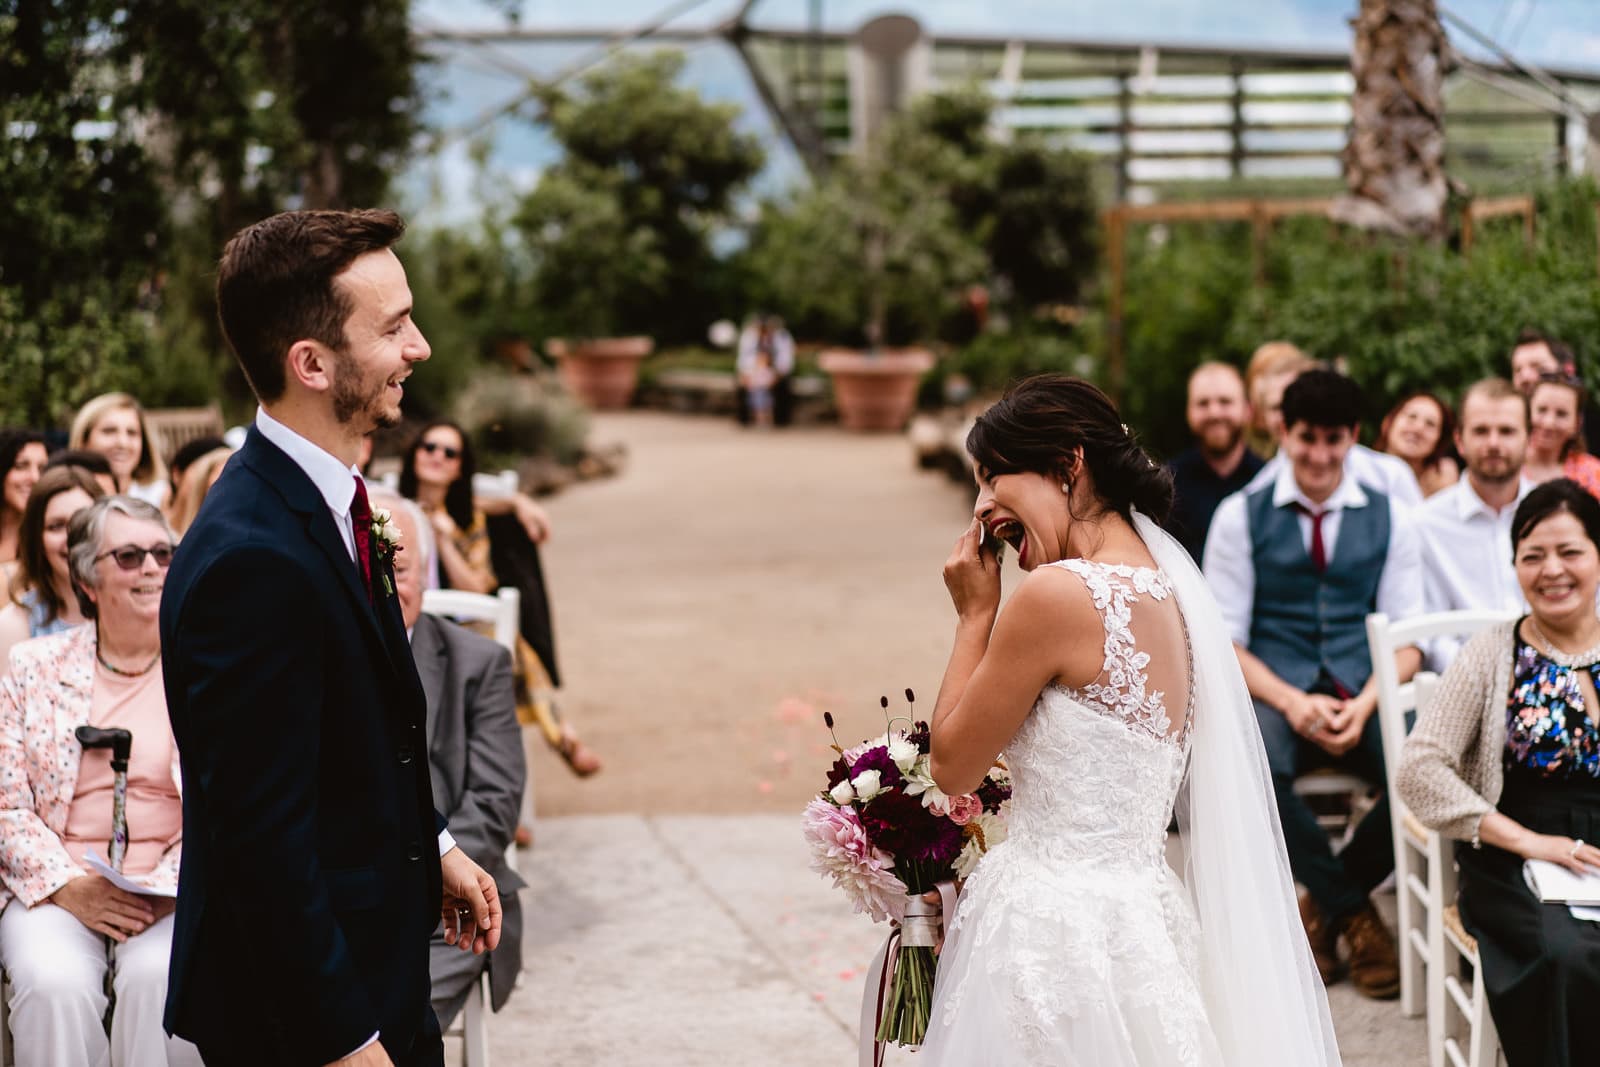 Wedding images from the Eden Project in Cornwal